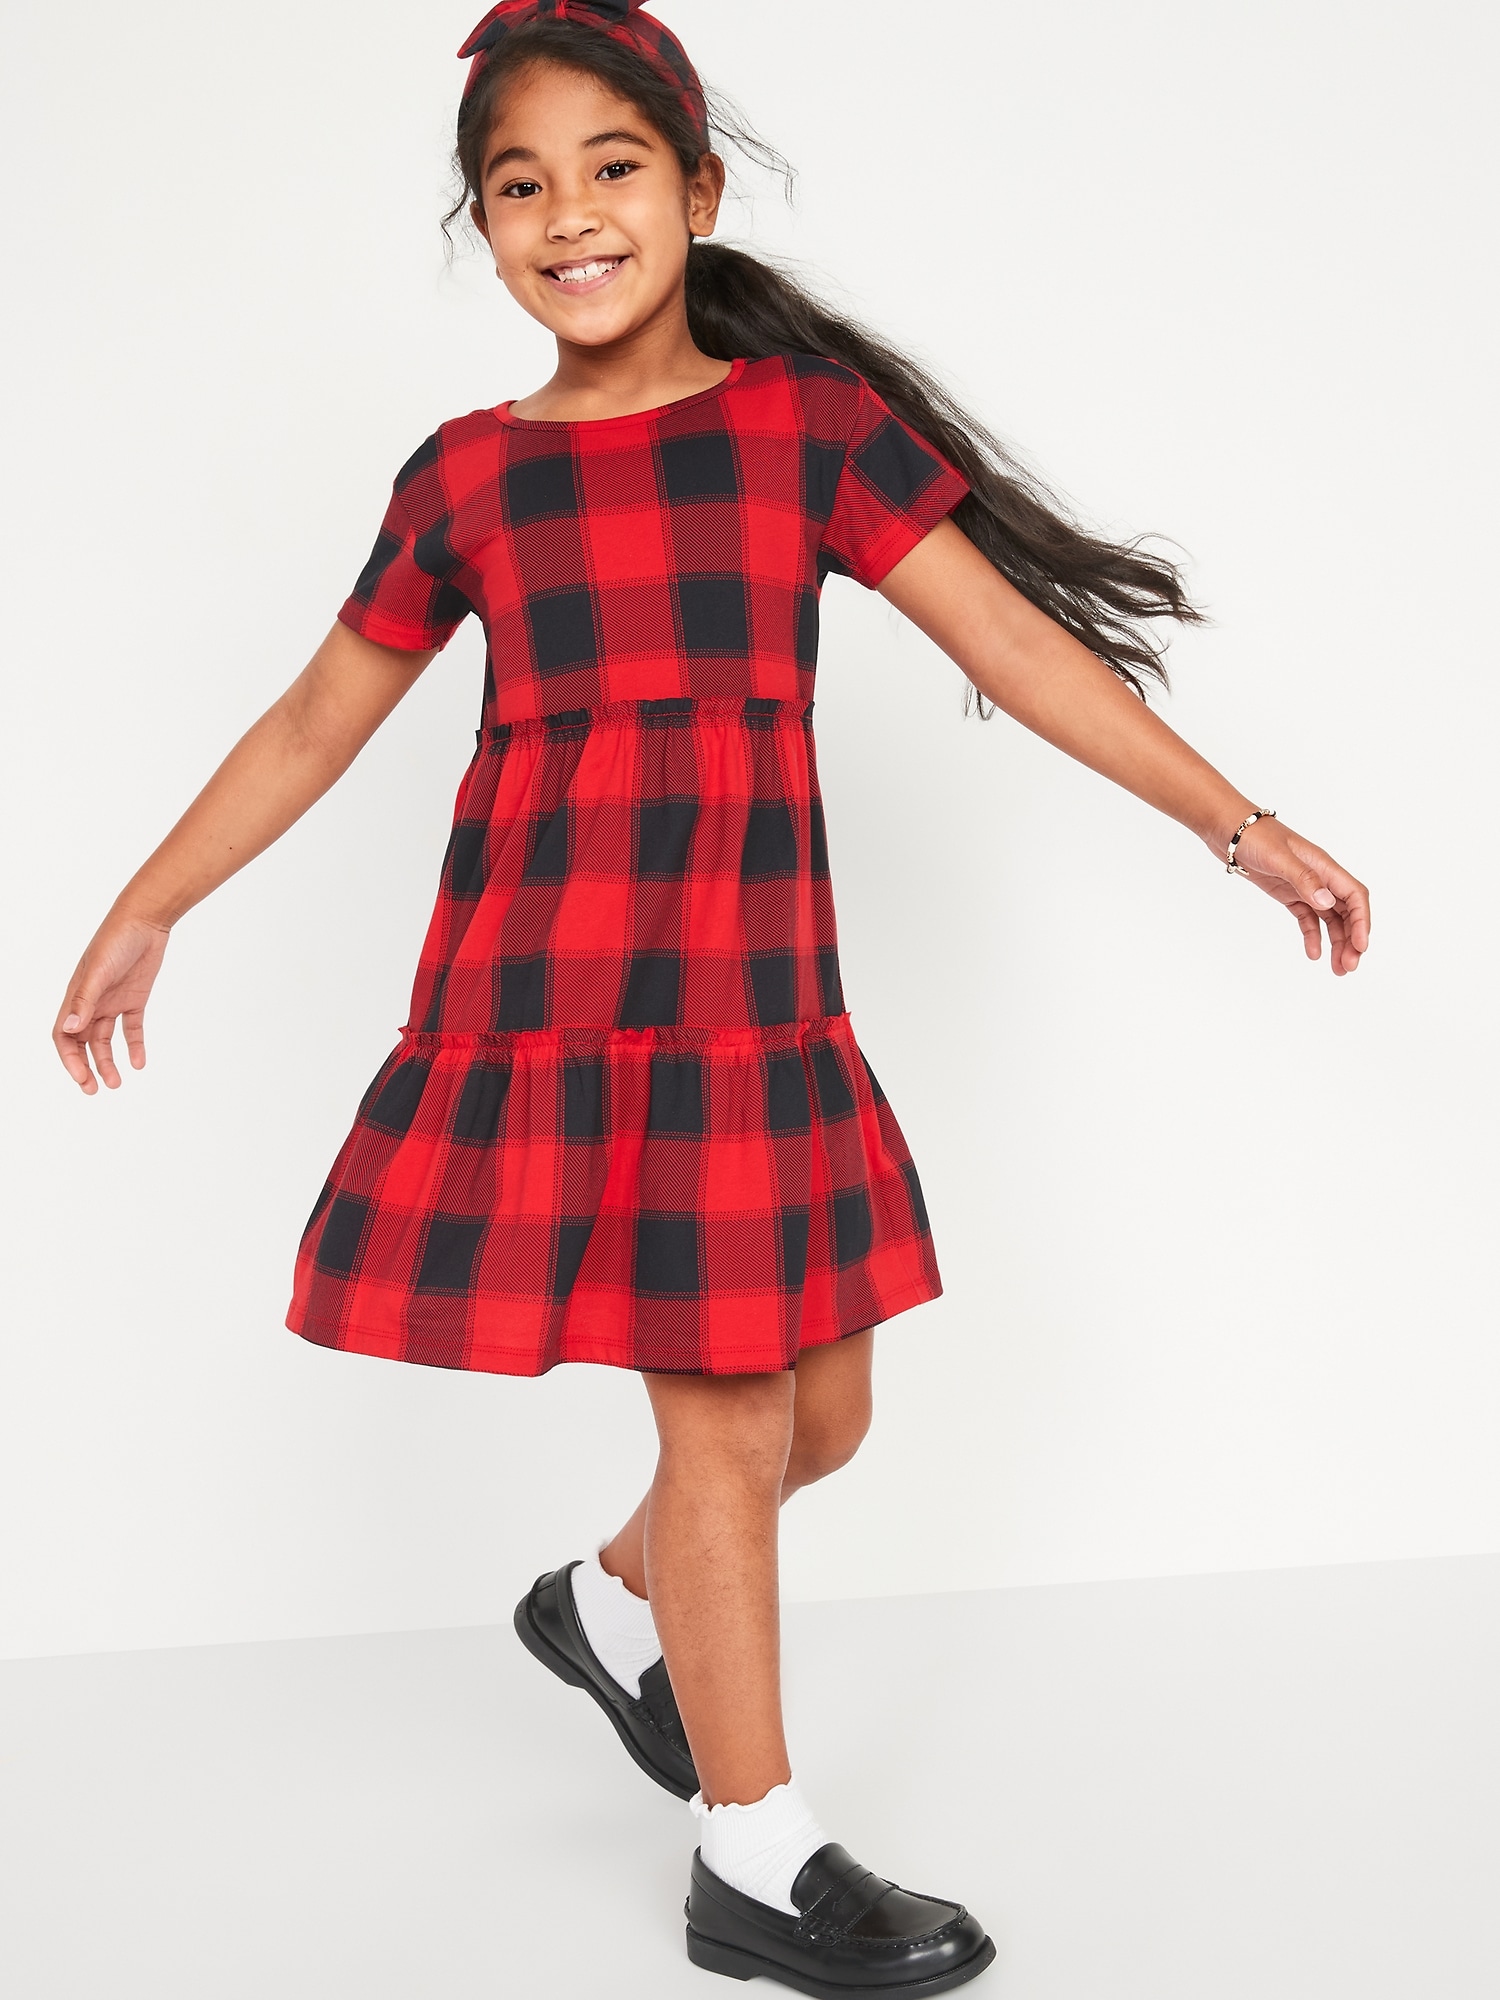 Tiered Printed Short Sleeve Dress For Girls Old Navy